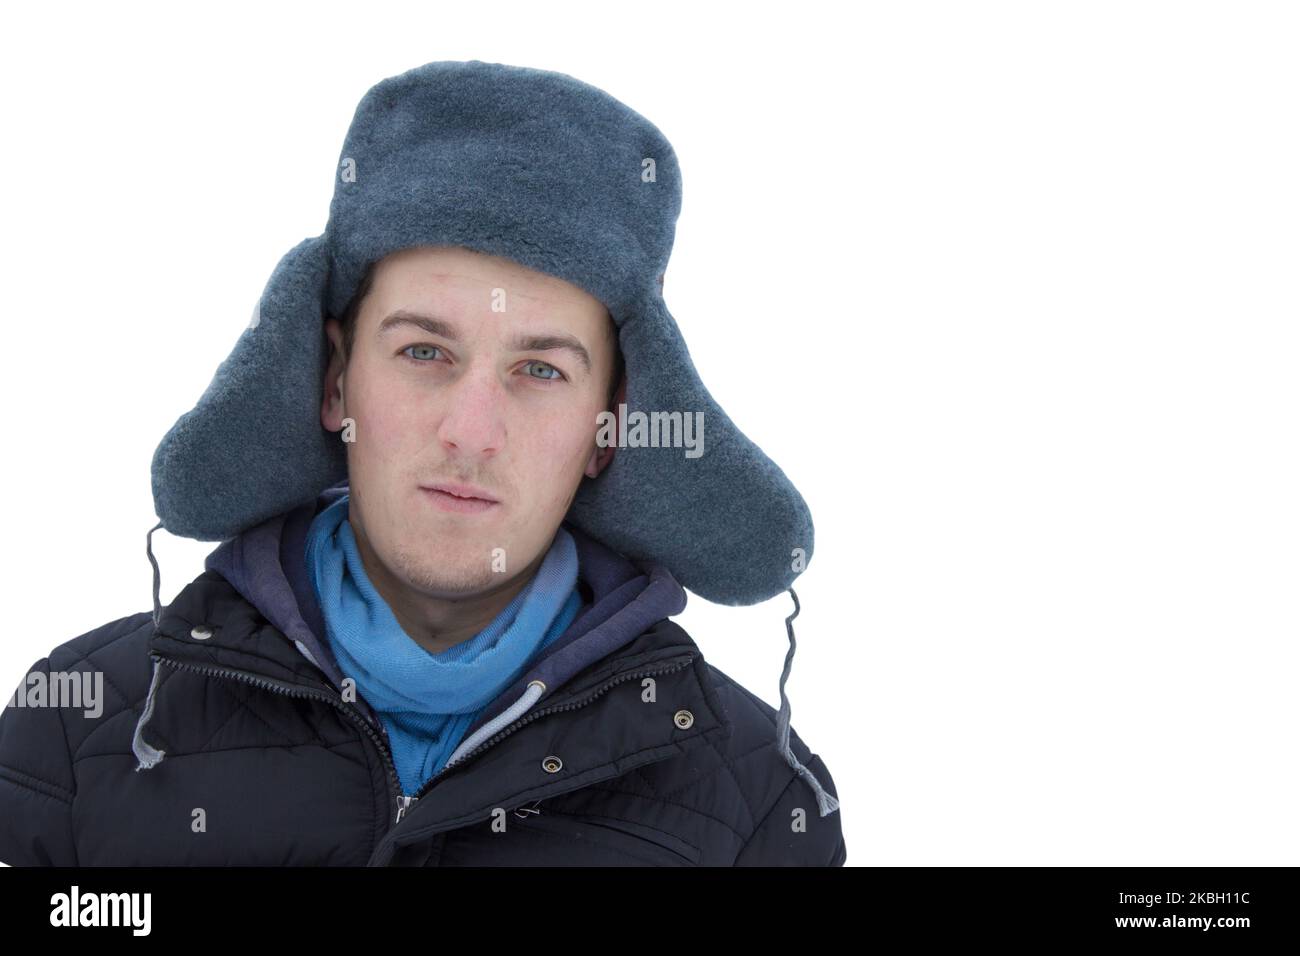 husband portrait dress up in the winter old hat with ears Stock Photo